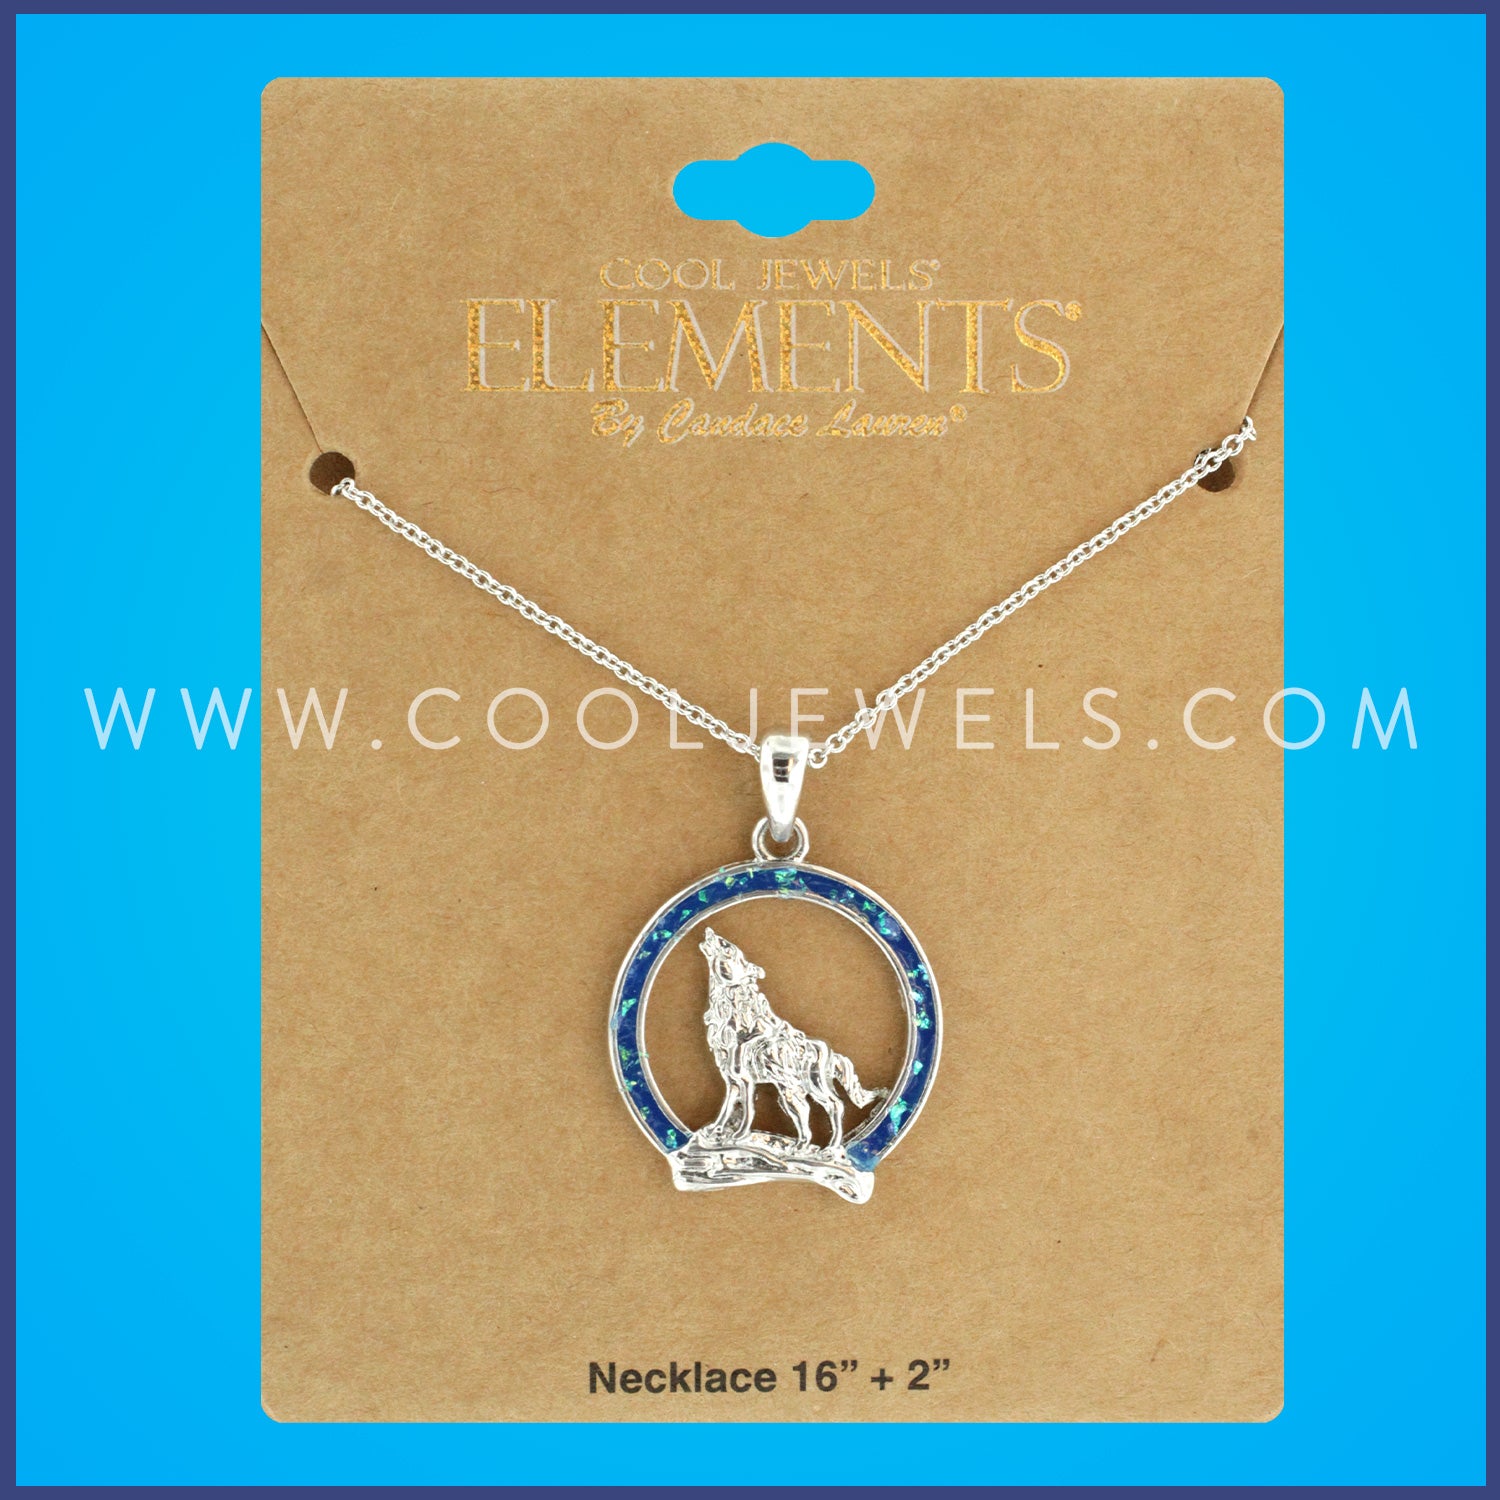 LINK CHAIN NECKLACE WITH WOLF IN BLUE CIRCLE PENDANT - CARDED